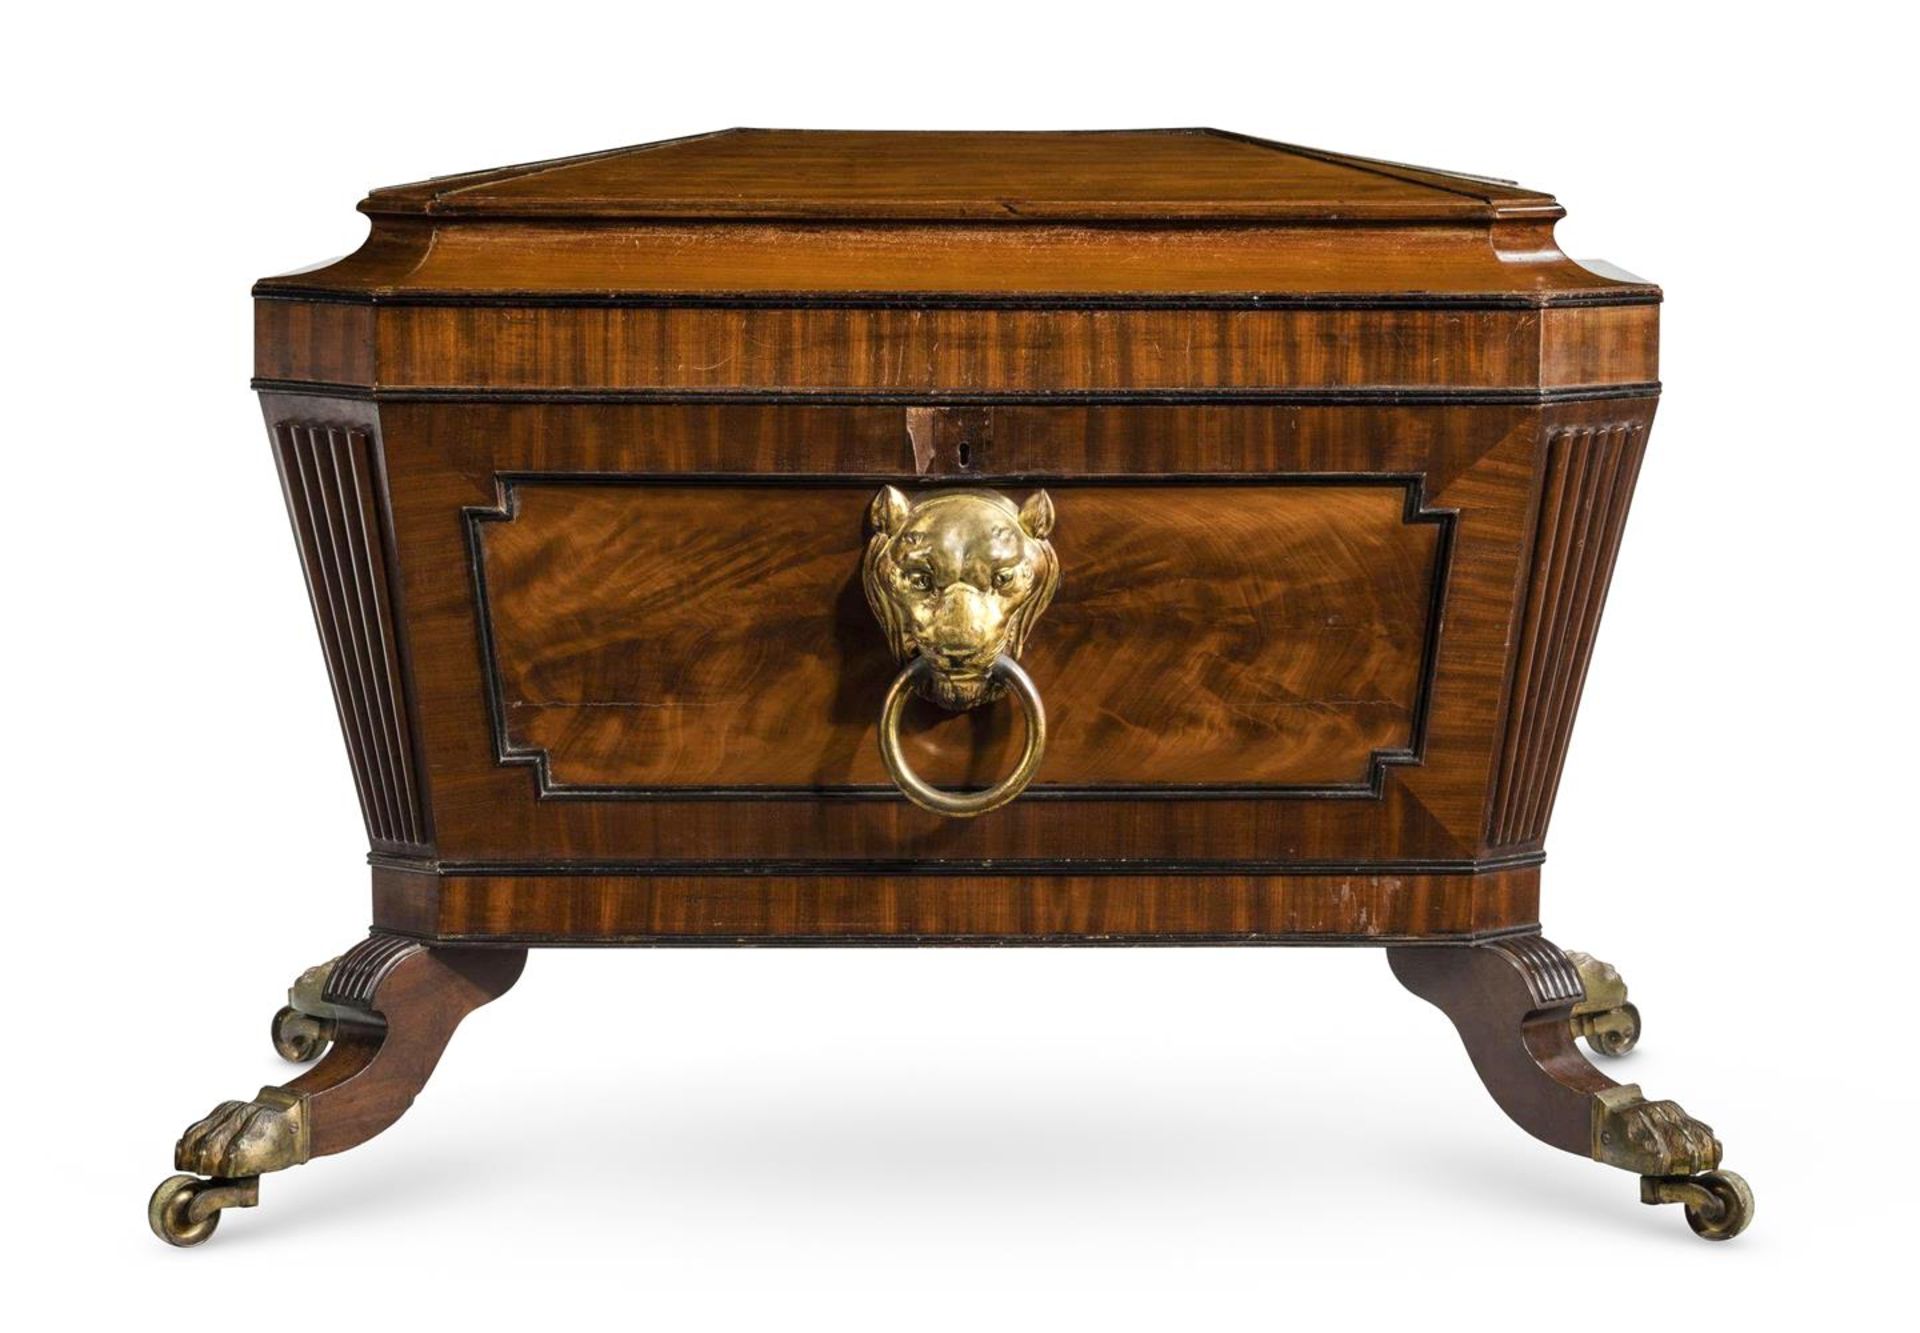 A REGENCY MAHOGANY SARCOPHAGUS LARGE WINE COOLER, EARLY 19TH CENTURY